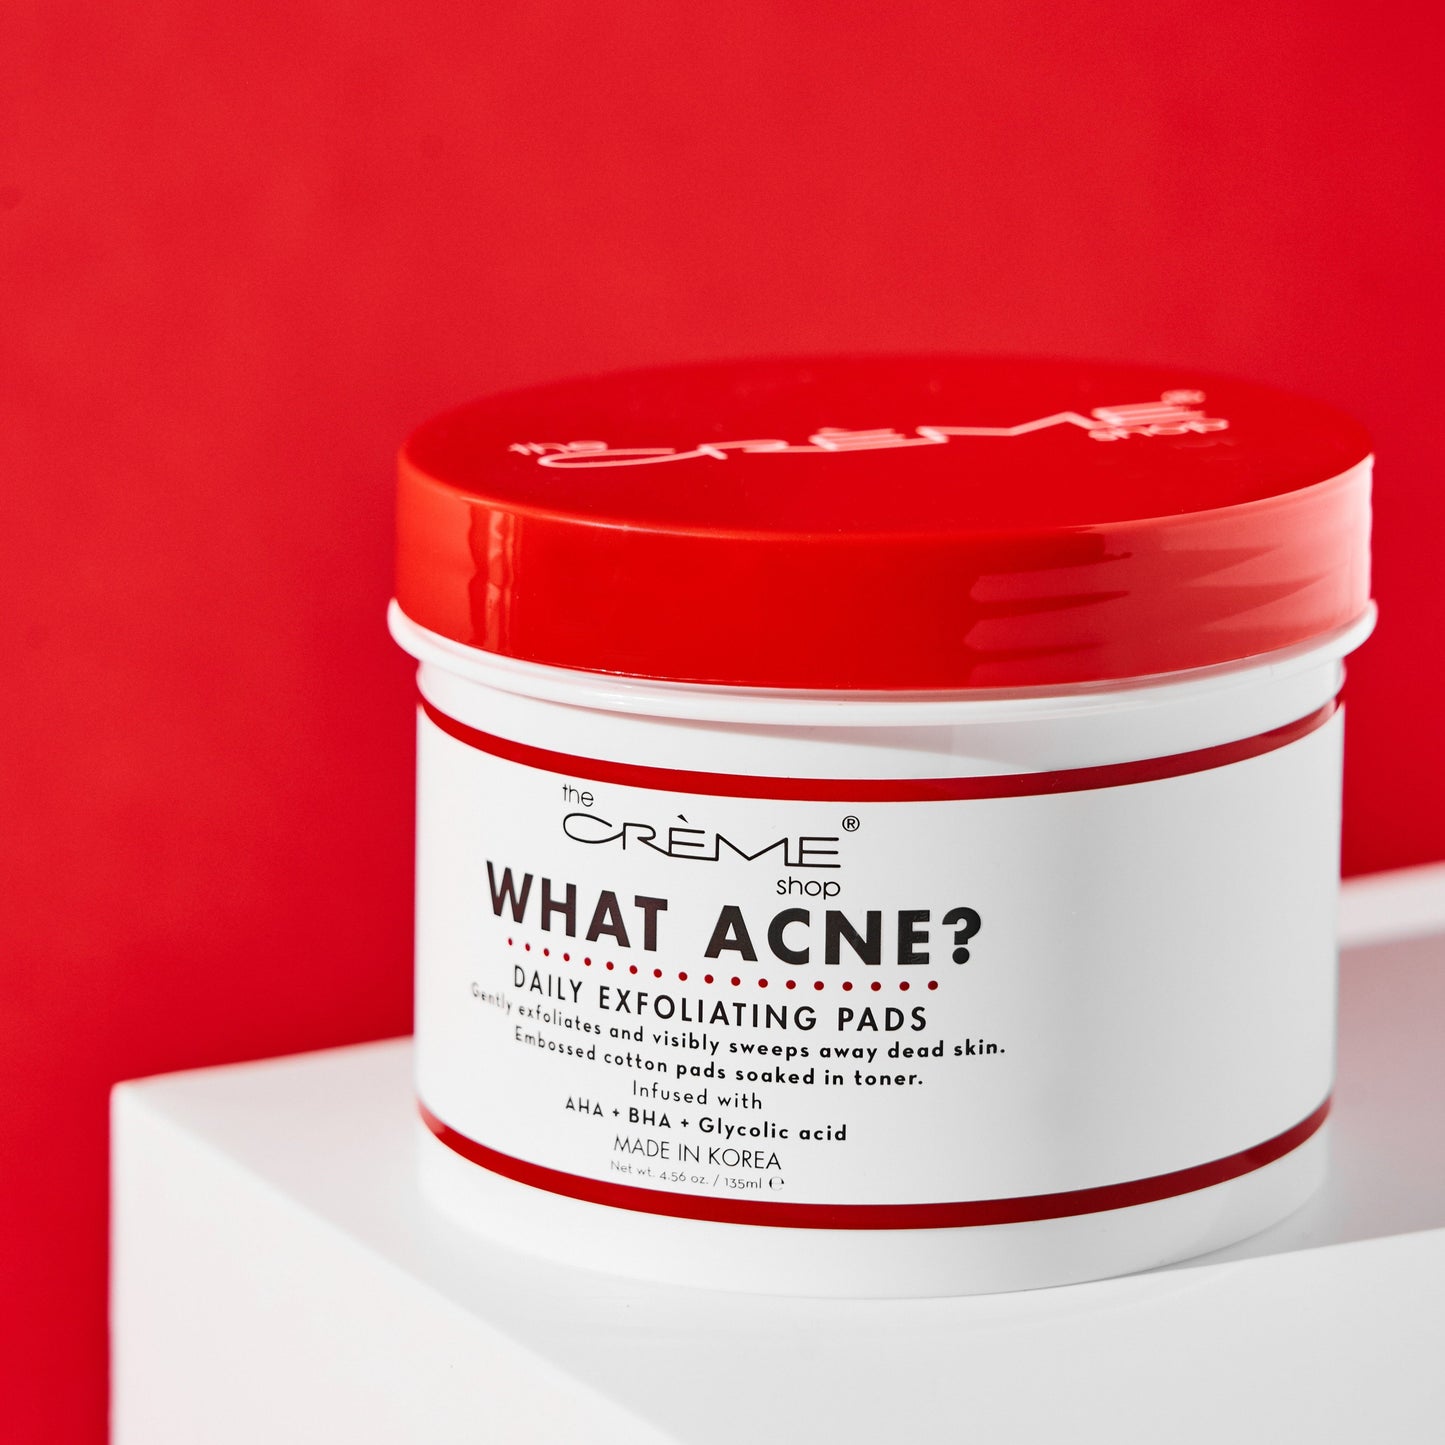 What Acne? - Daily Exfoliating Pads - The Crème Shop